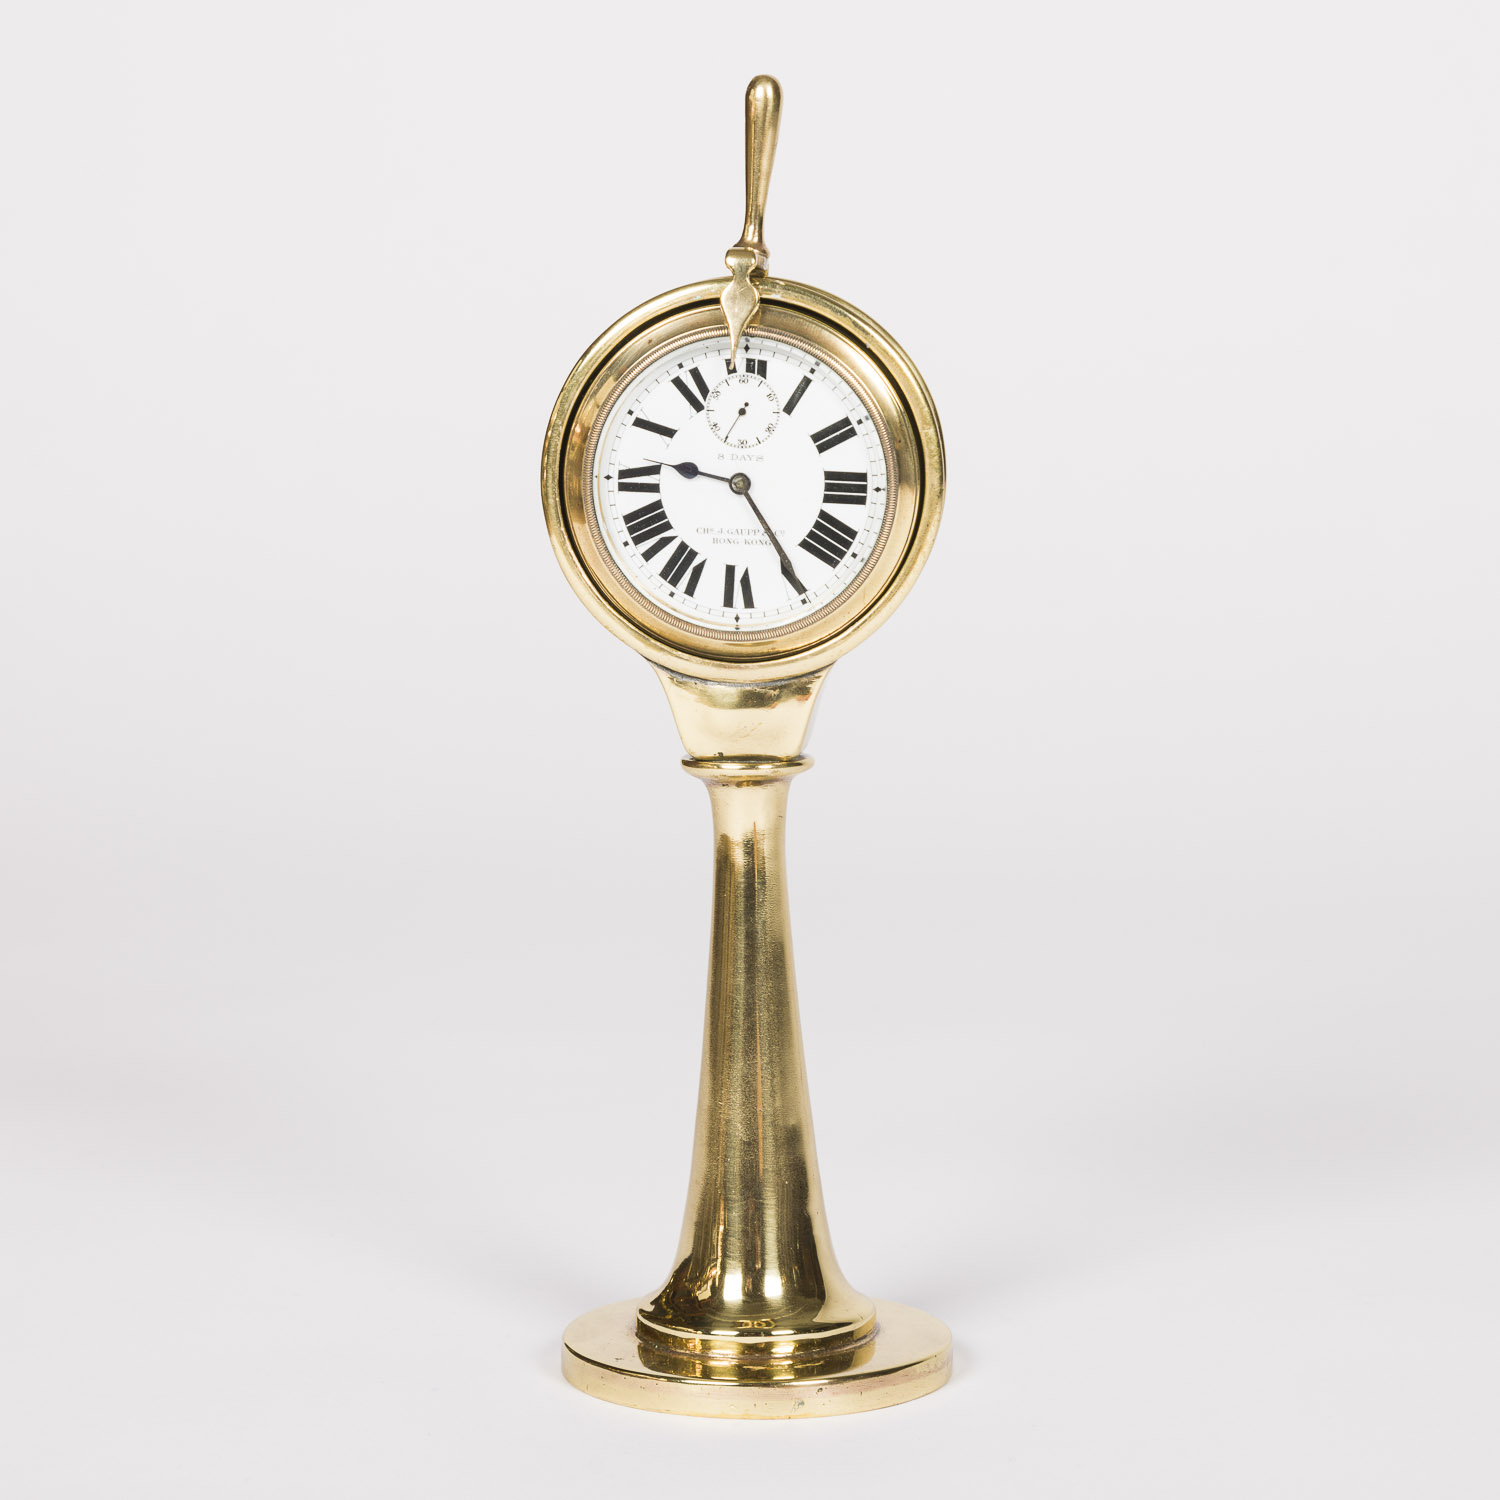 Watch by Gaupp & Co of Hong Kong, in the form of a Ship’s telegraph.